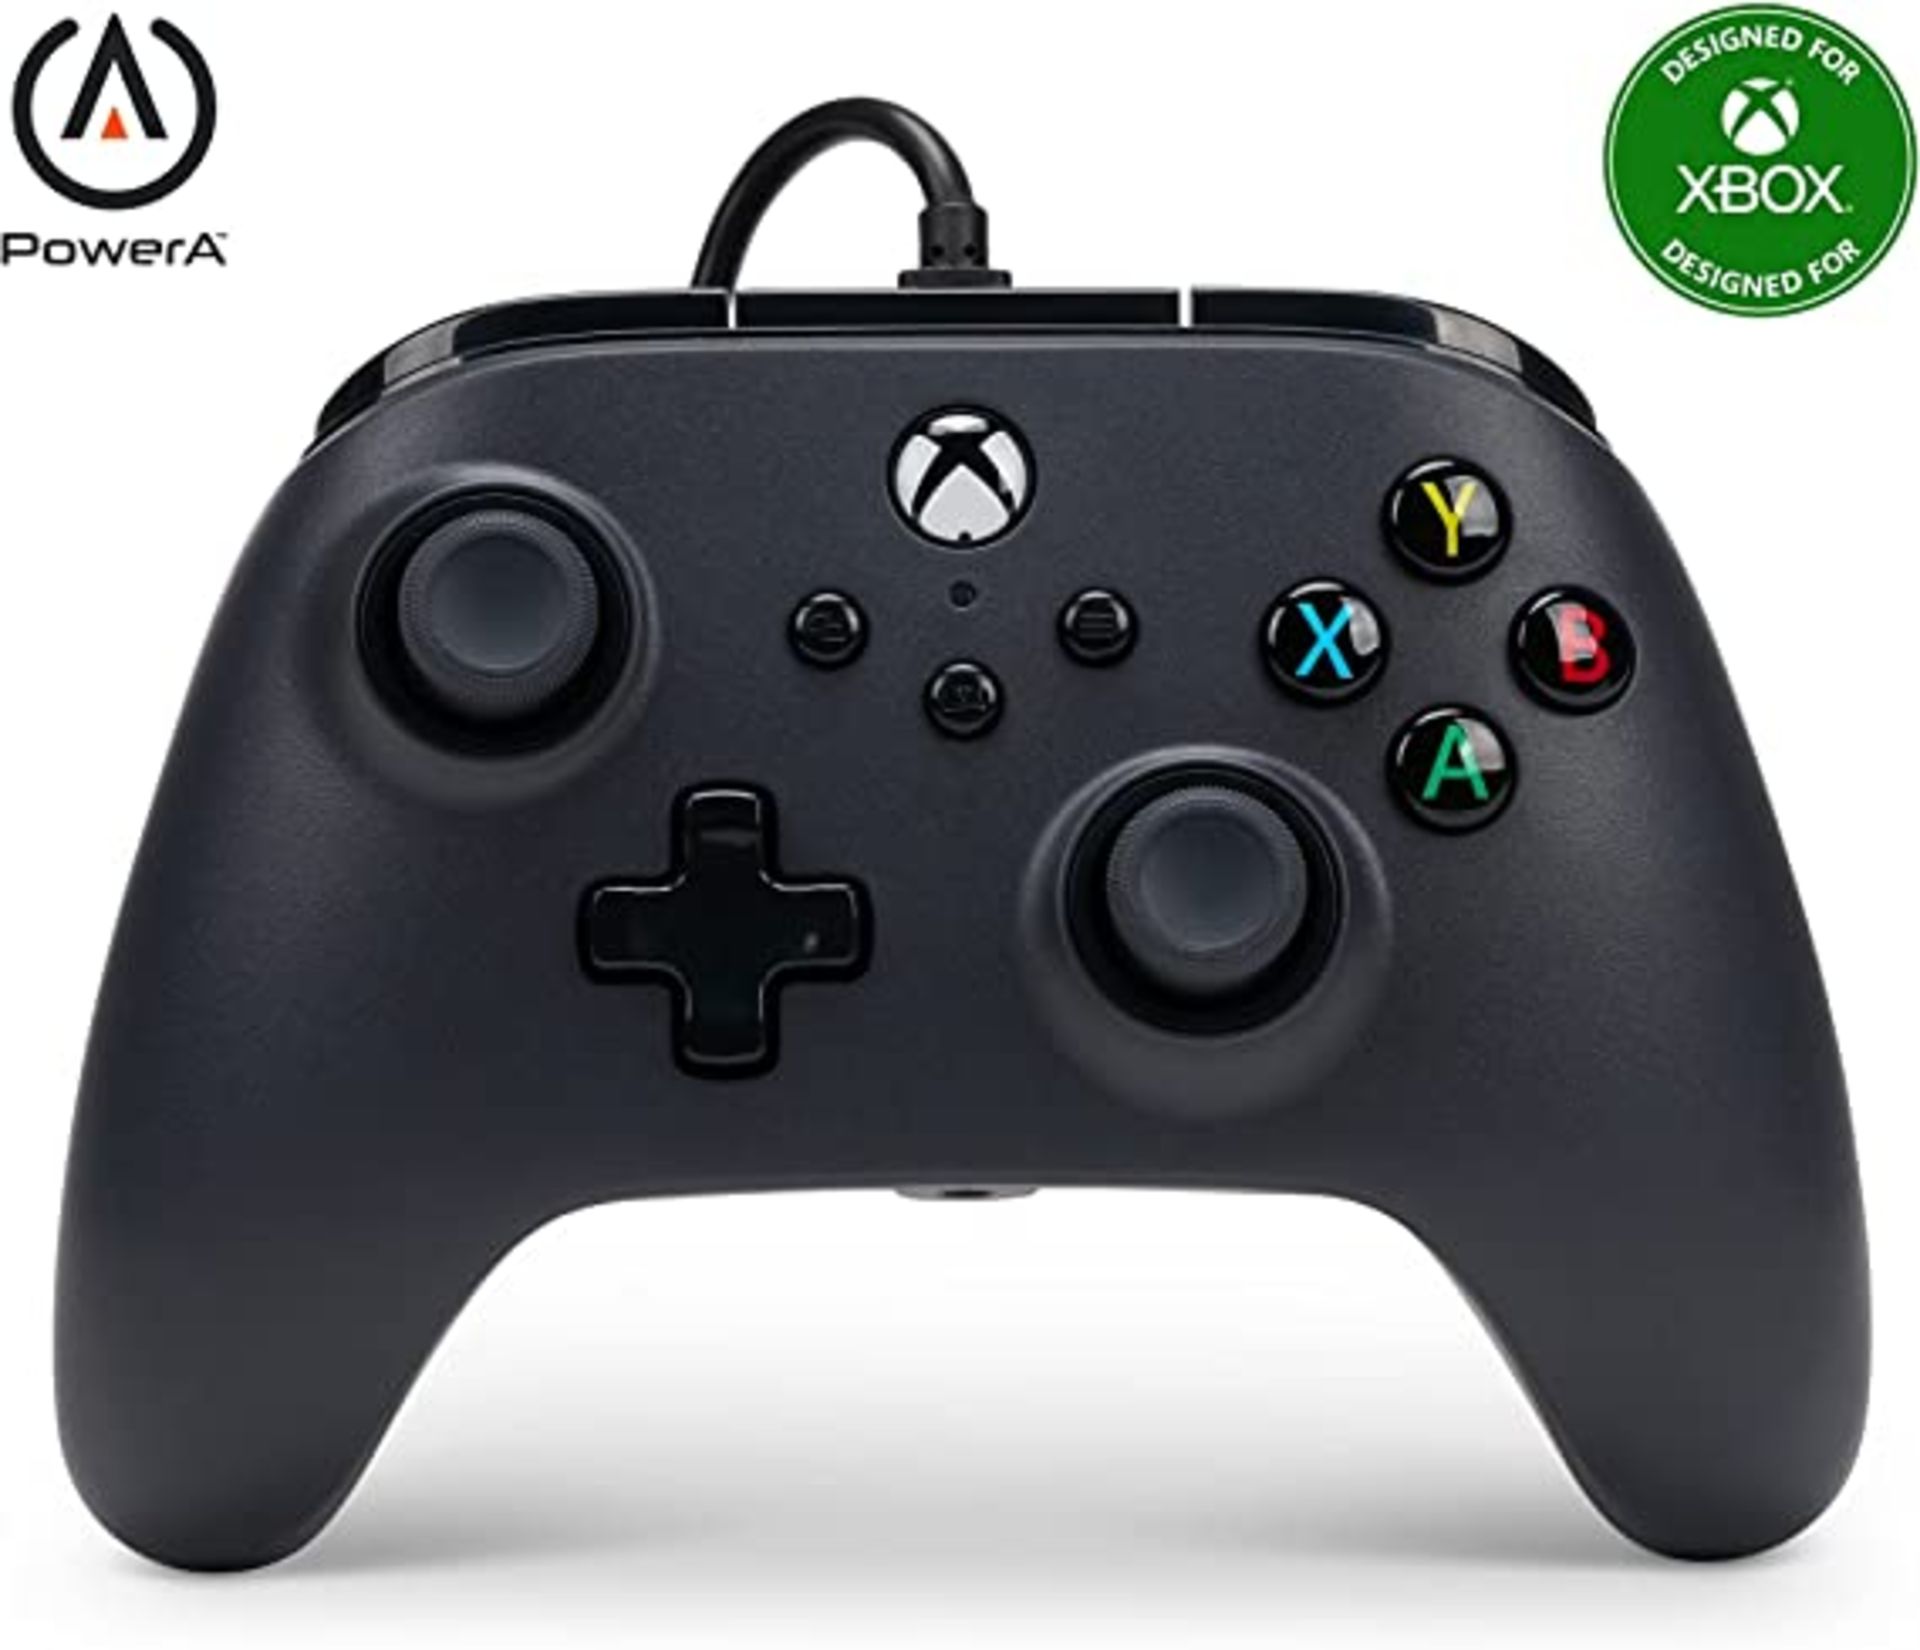 4x Power A Xbox Wired Controller Black RRP £30 Each. Lot RRP £120.